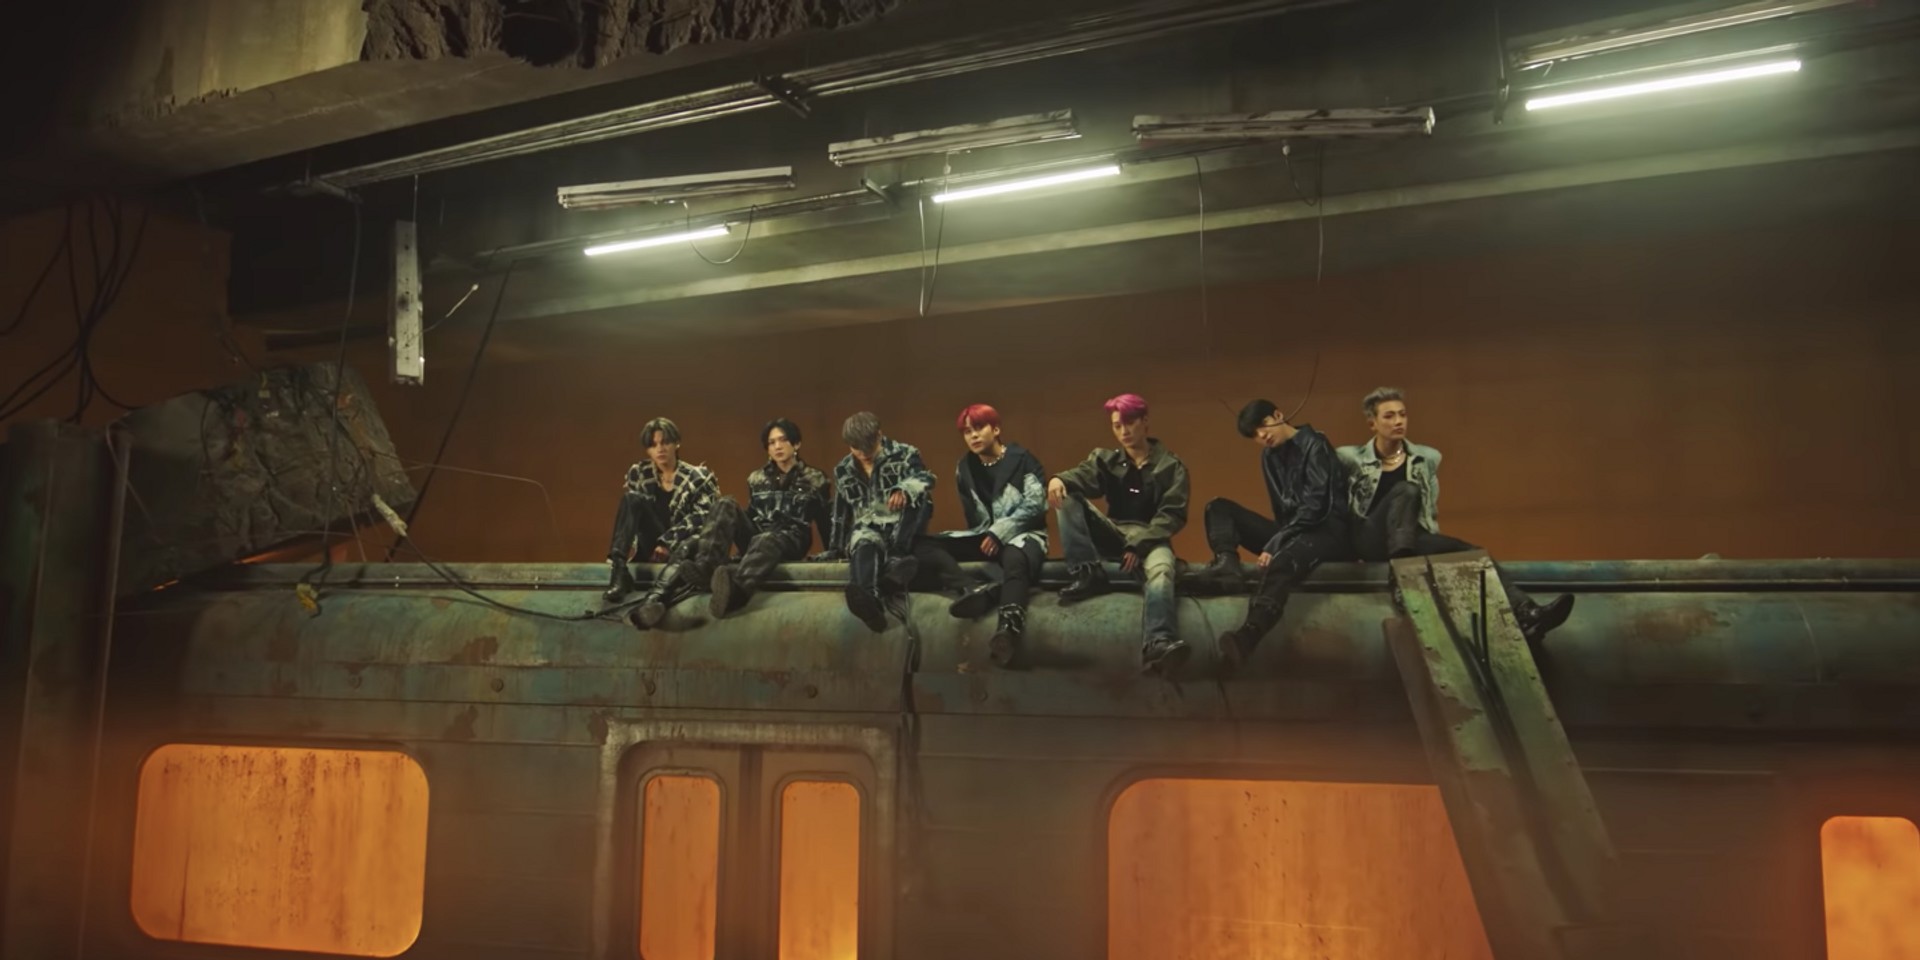 ATEEZ drop latest album 'ZERO: FEVER Part 2', dazzle fans with new music video for 'Fireworks (I'm The One)' – watch